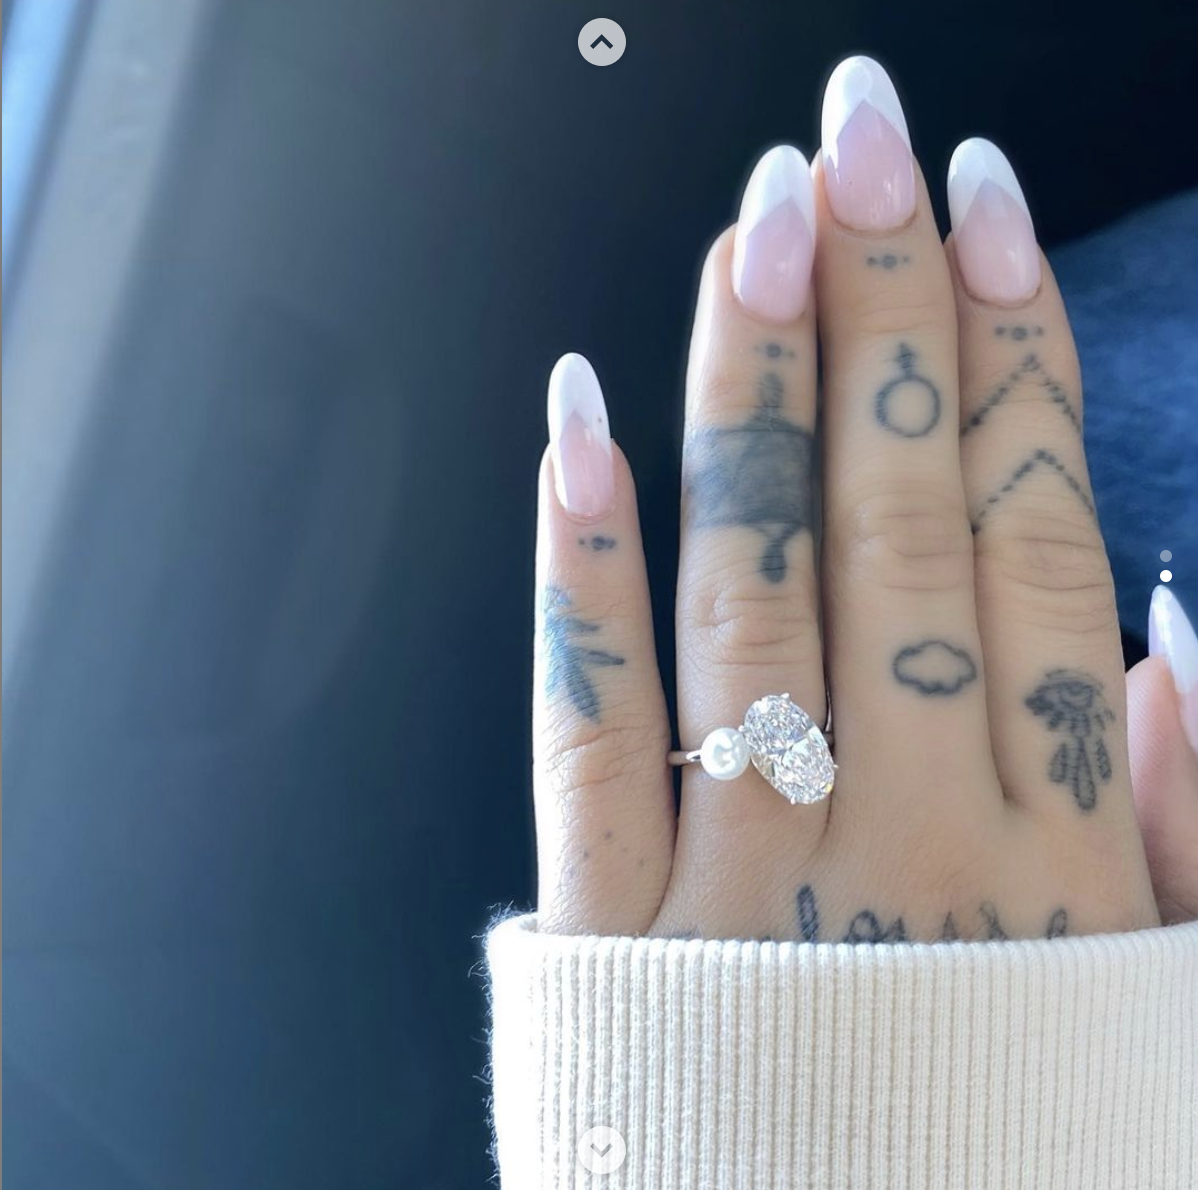 Get Inspired by Ariana Grande's Stunning Pear-Cut Diamond Engagement Ring